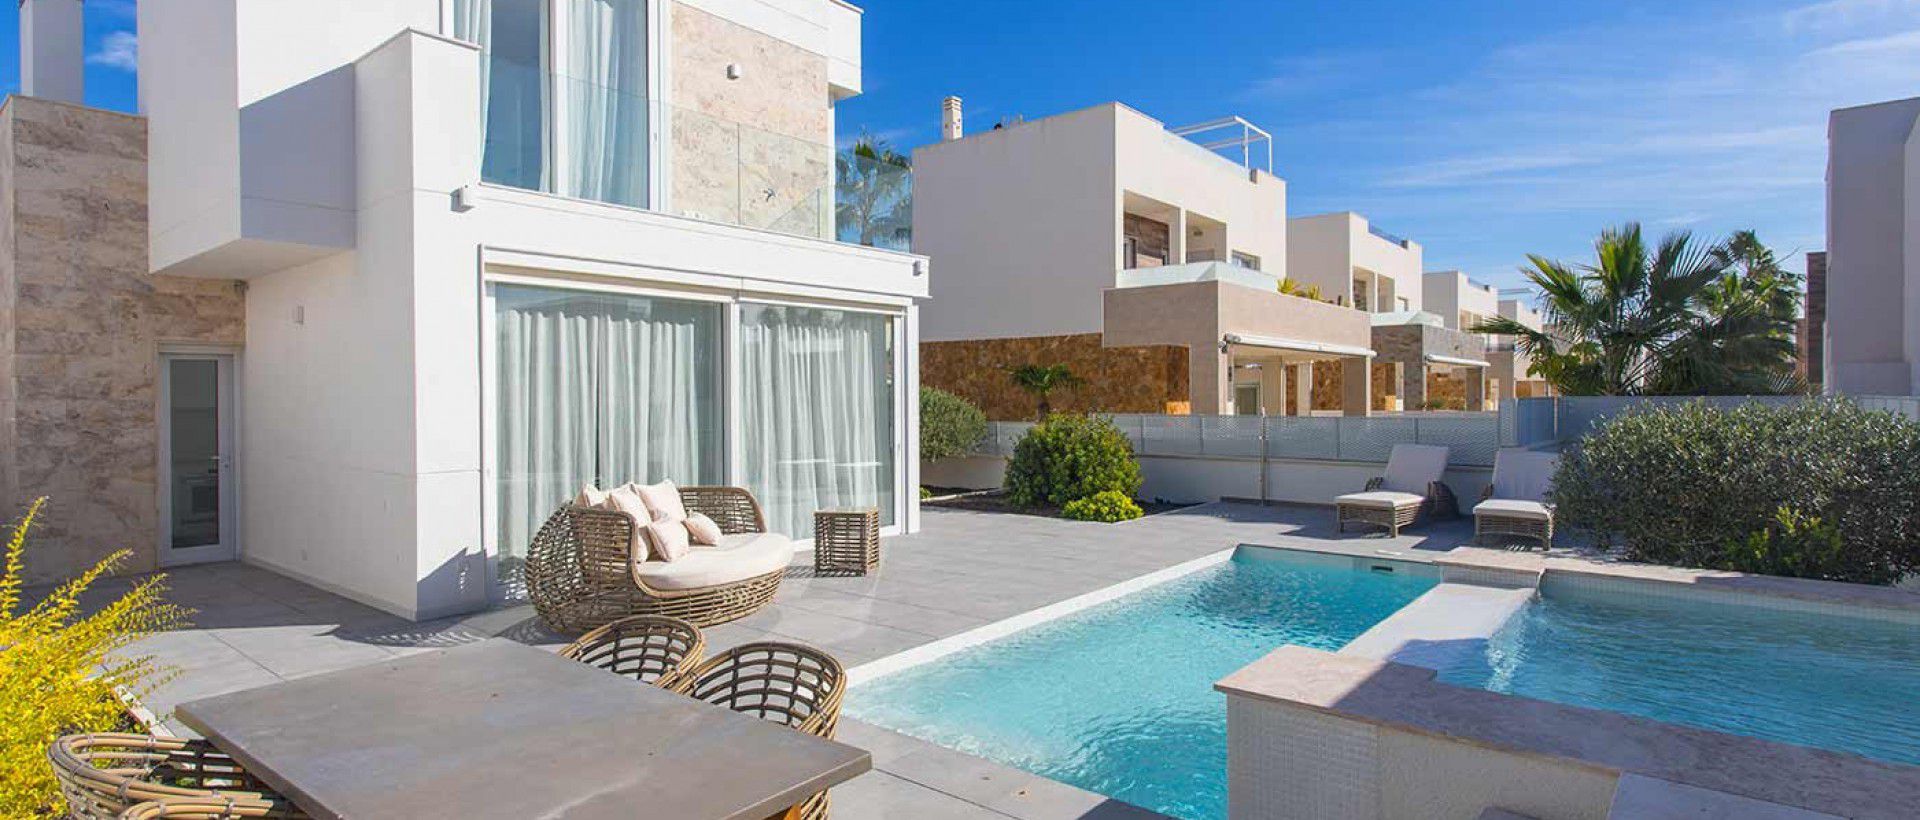 Luxury villa with pool and jacuzzi in Costa Blanca